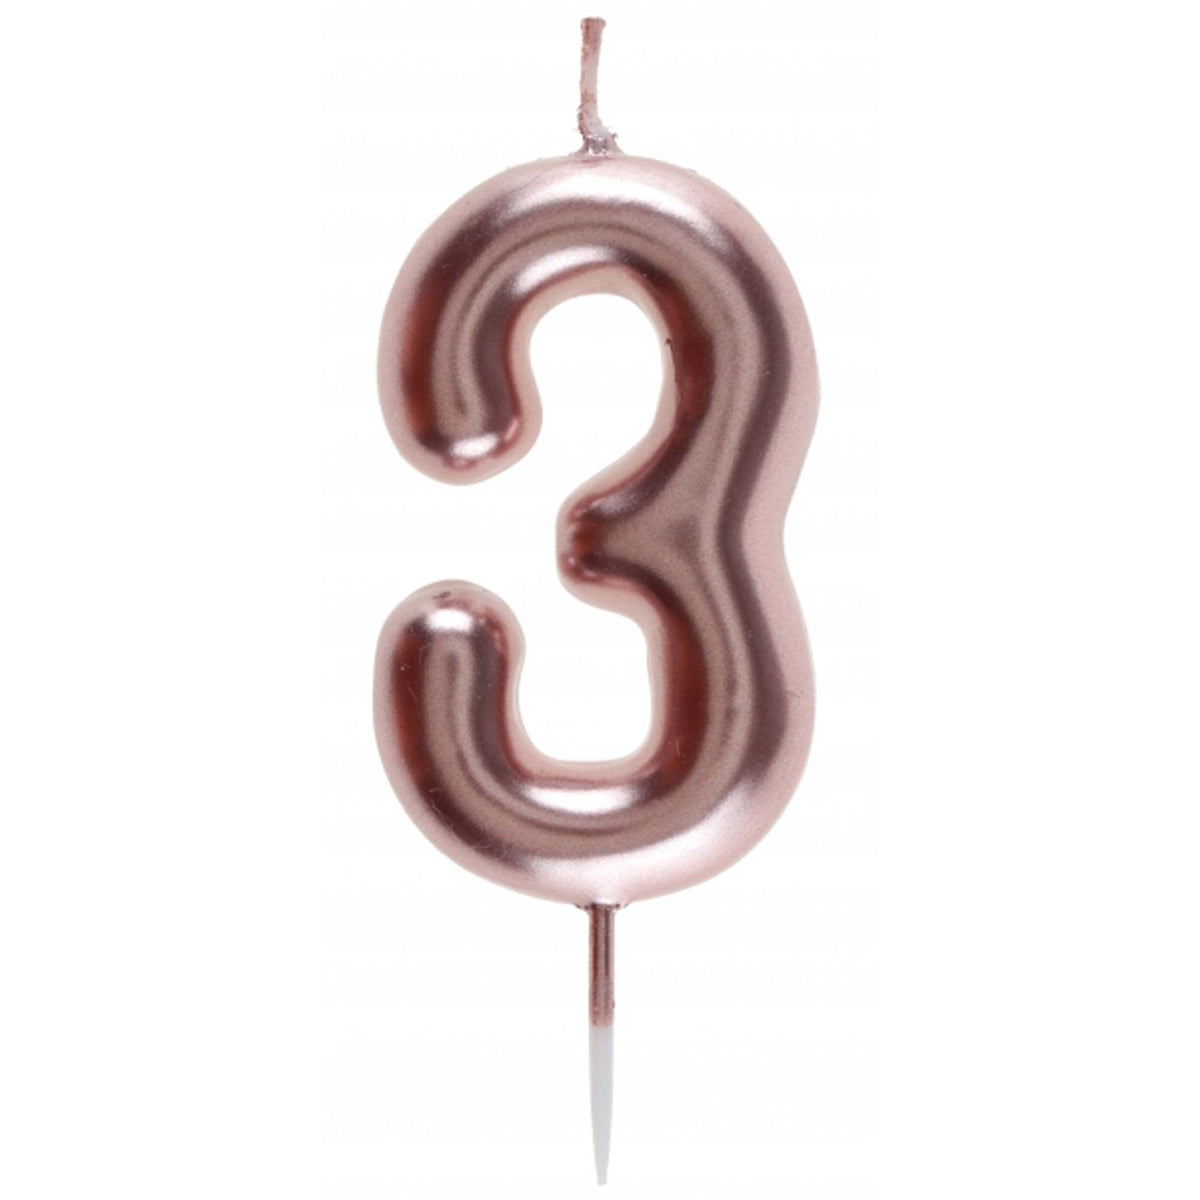 SANTEX Cake Supplies Rose Gold Number 3 Birthday Candle, 1 Count 3660380068808